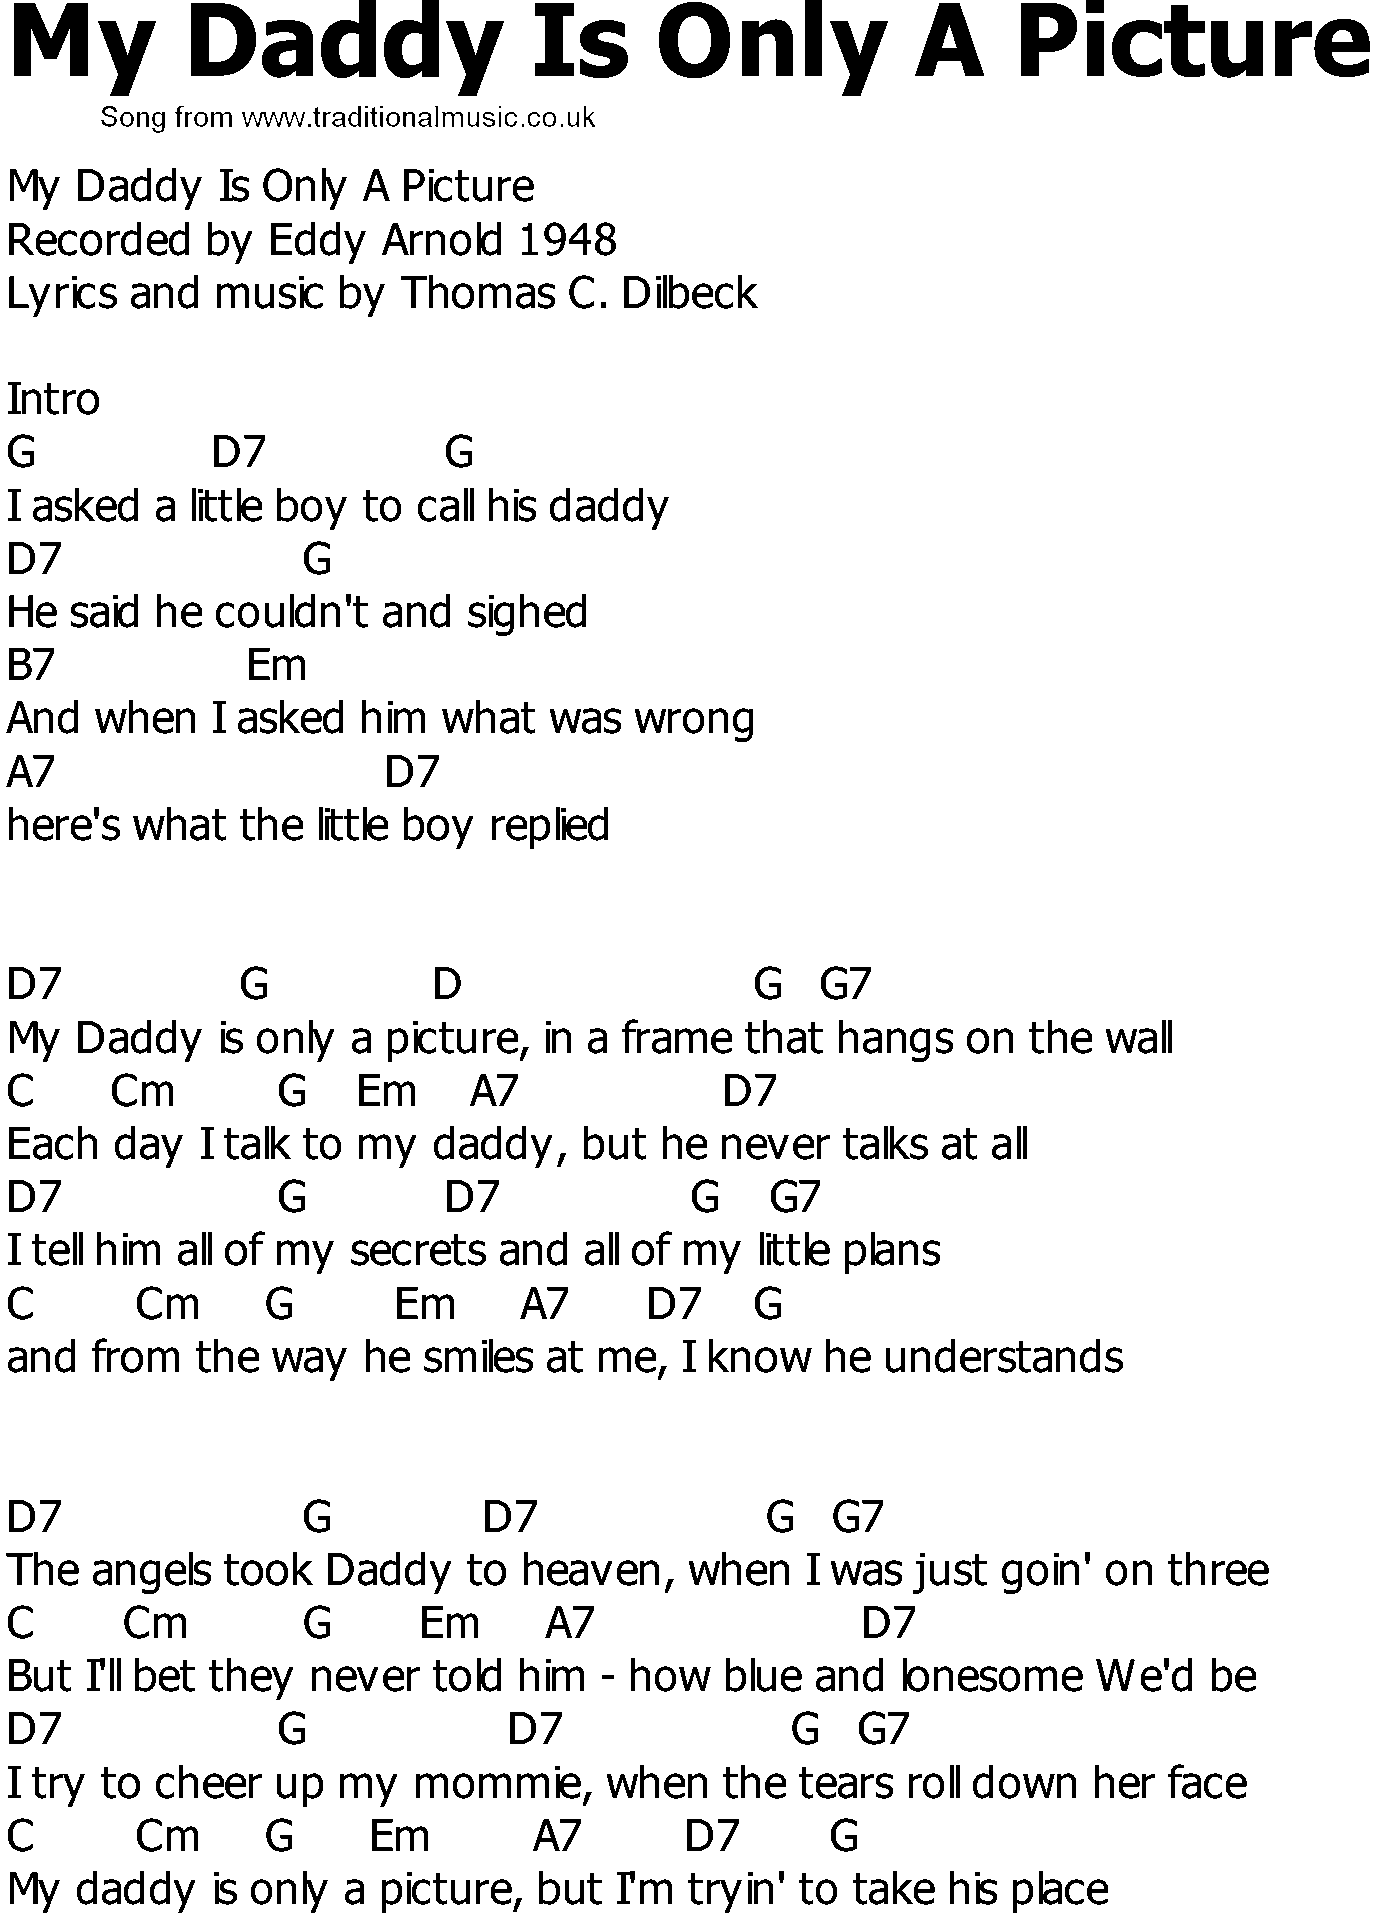 Old Country song lyrics with chords - My Daddy Is Only A Picture